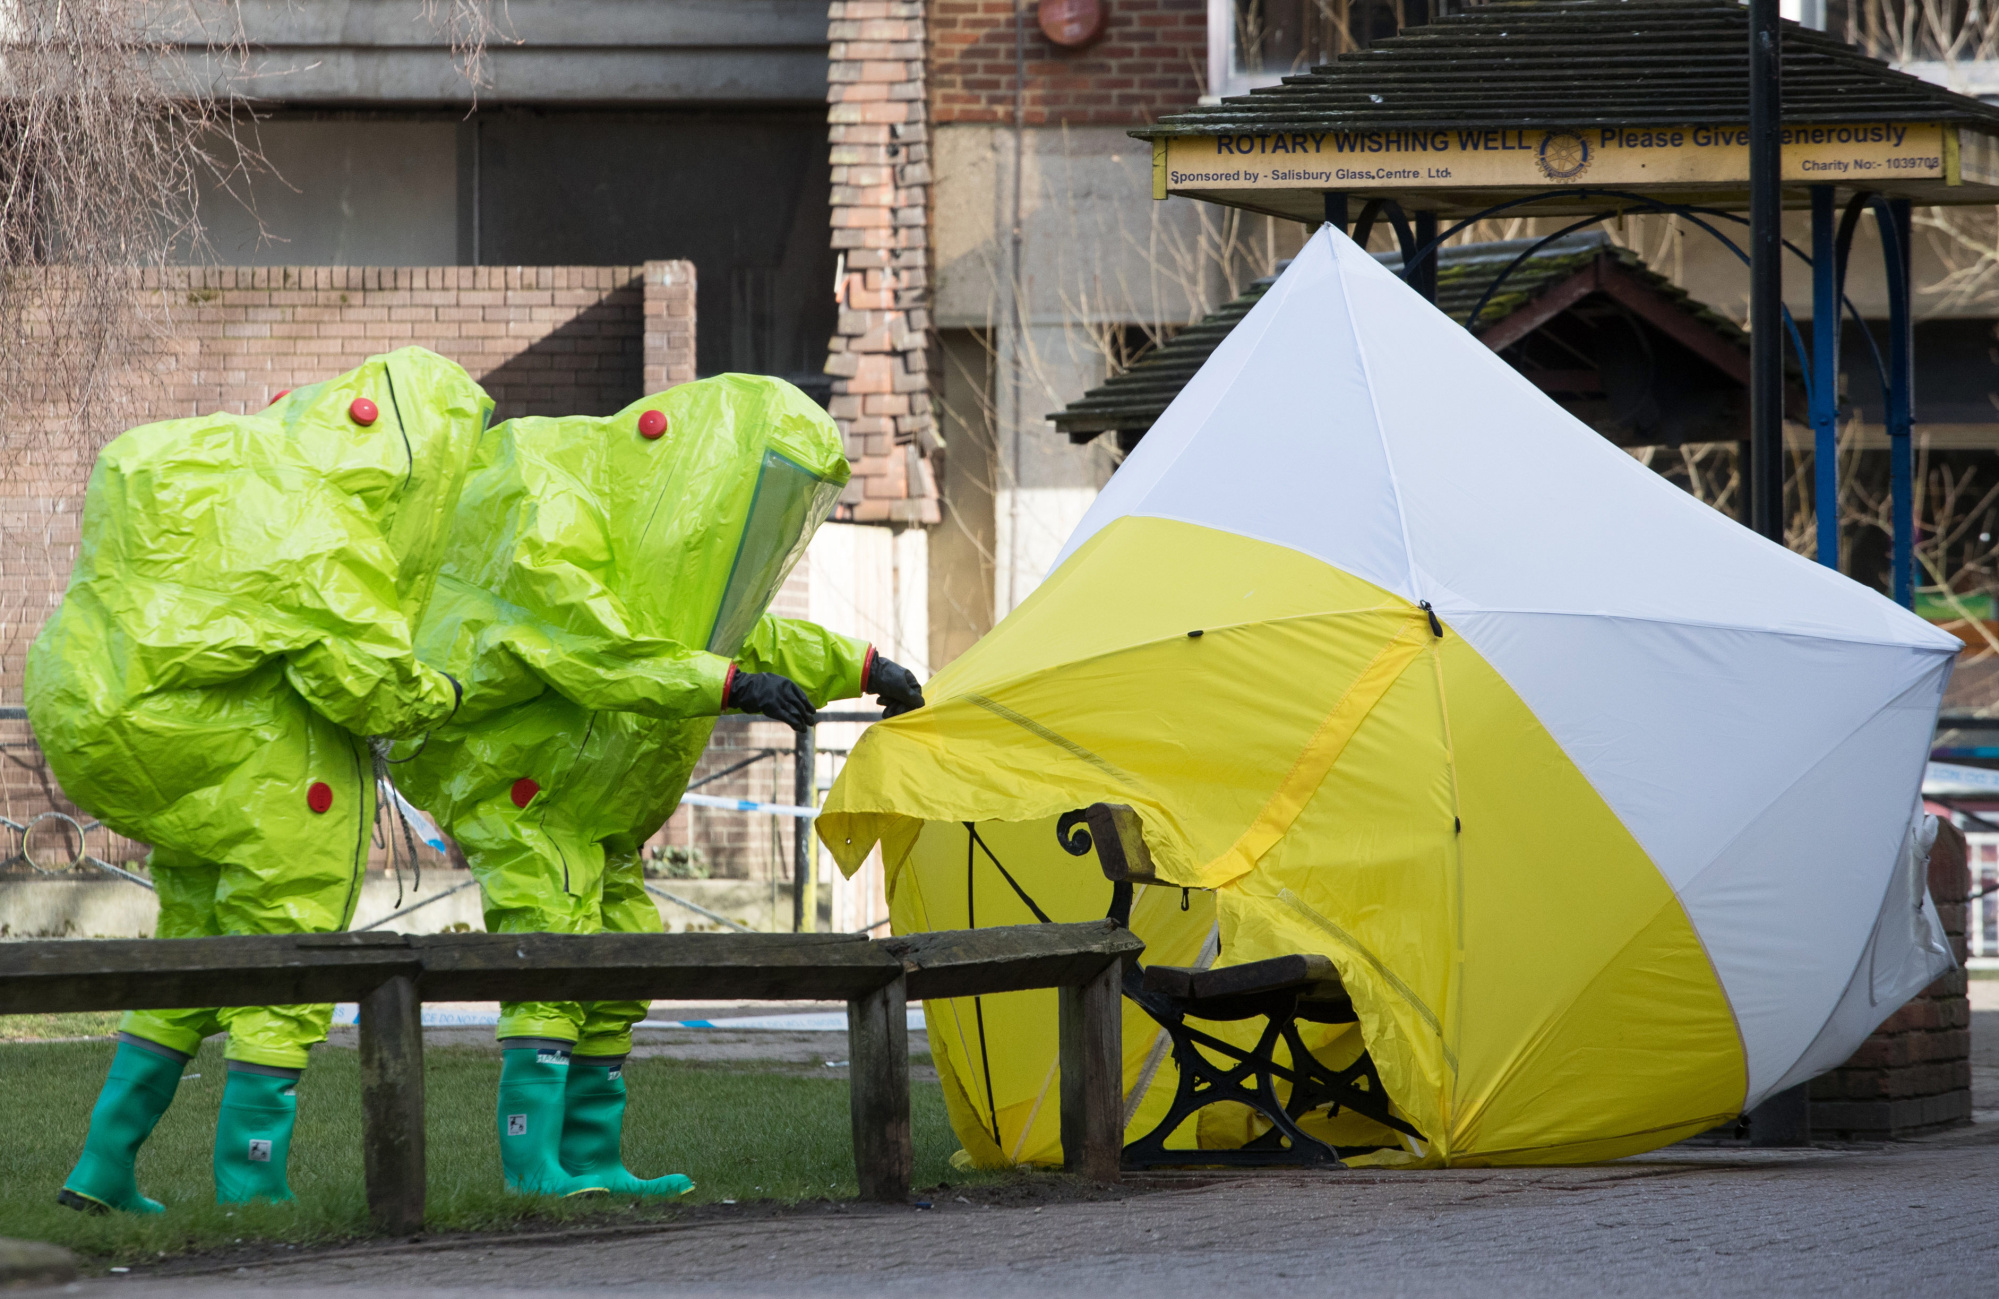 Specialist officers secure a forensic tent covering a bench in Salisbury, U.K., on March 8.